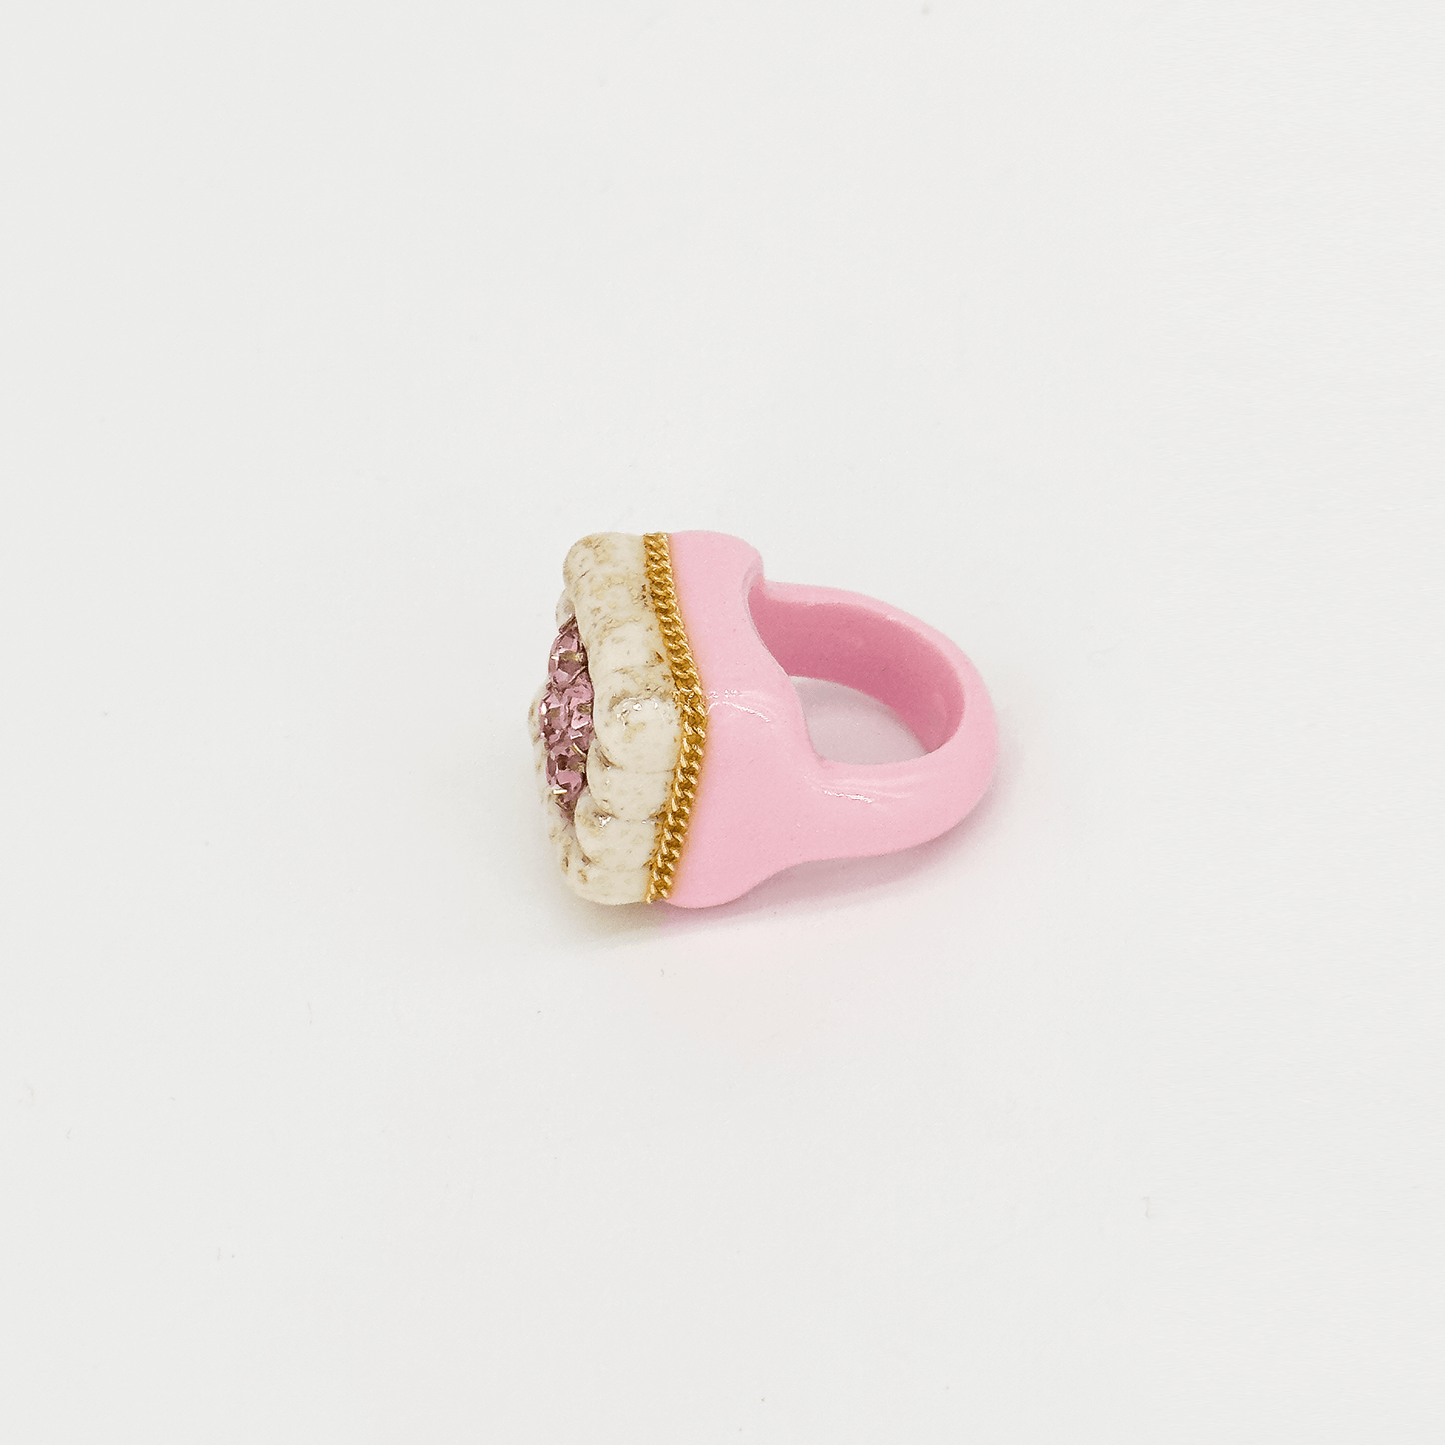 Öddsome Dreamland Collection-Pillow Soft Delight Ring Side View